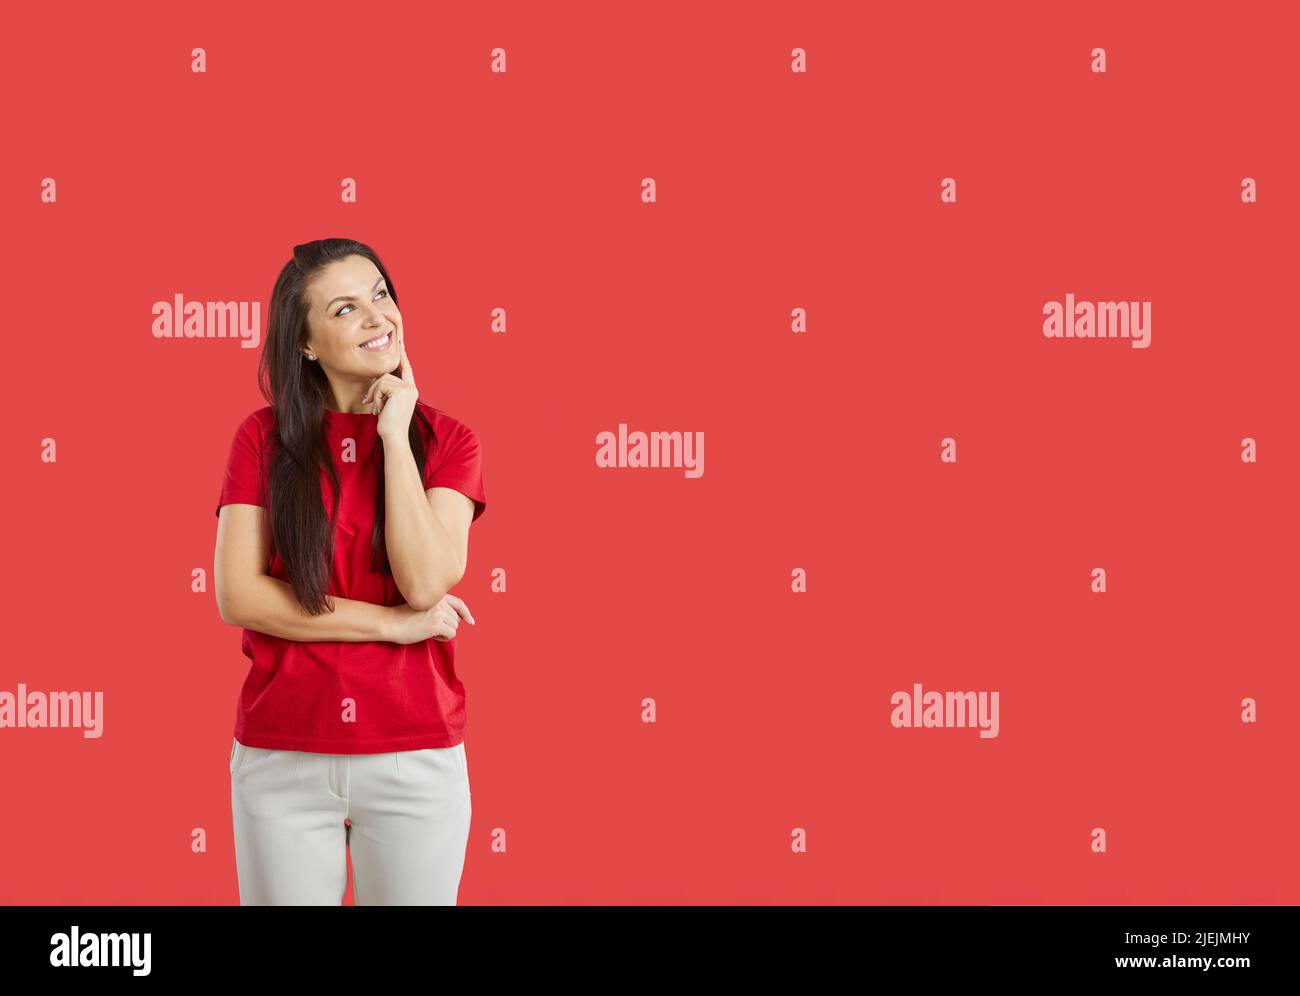 Cute smiling woman on red background ponders, imagines or comes up with something interesting. Stock Photo